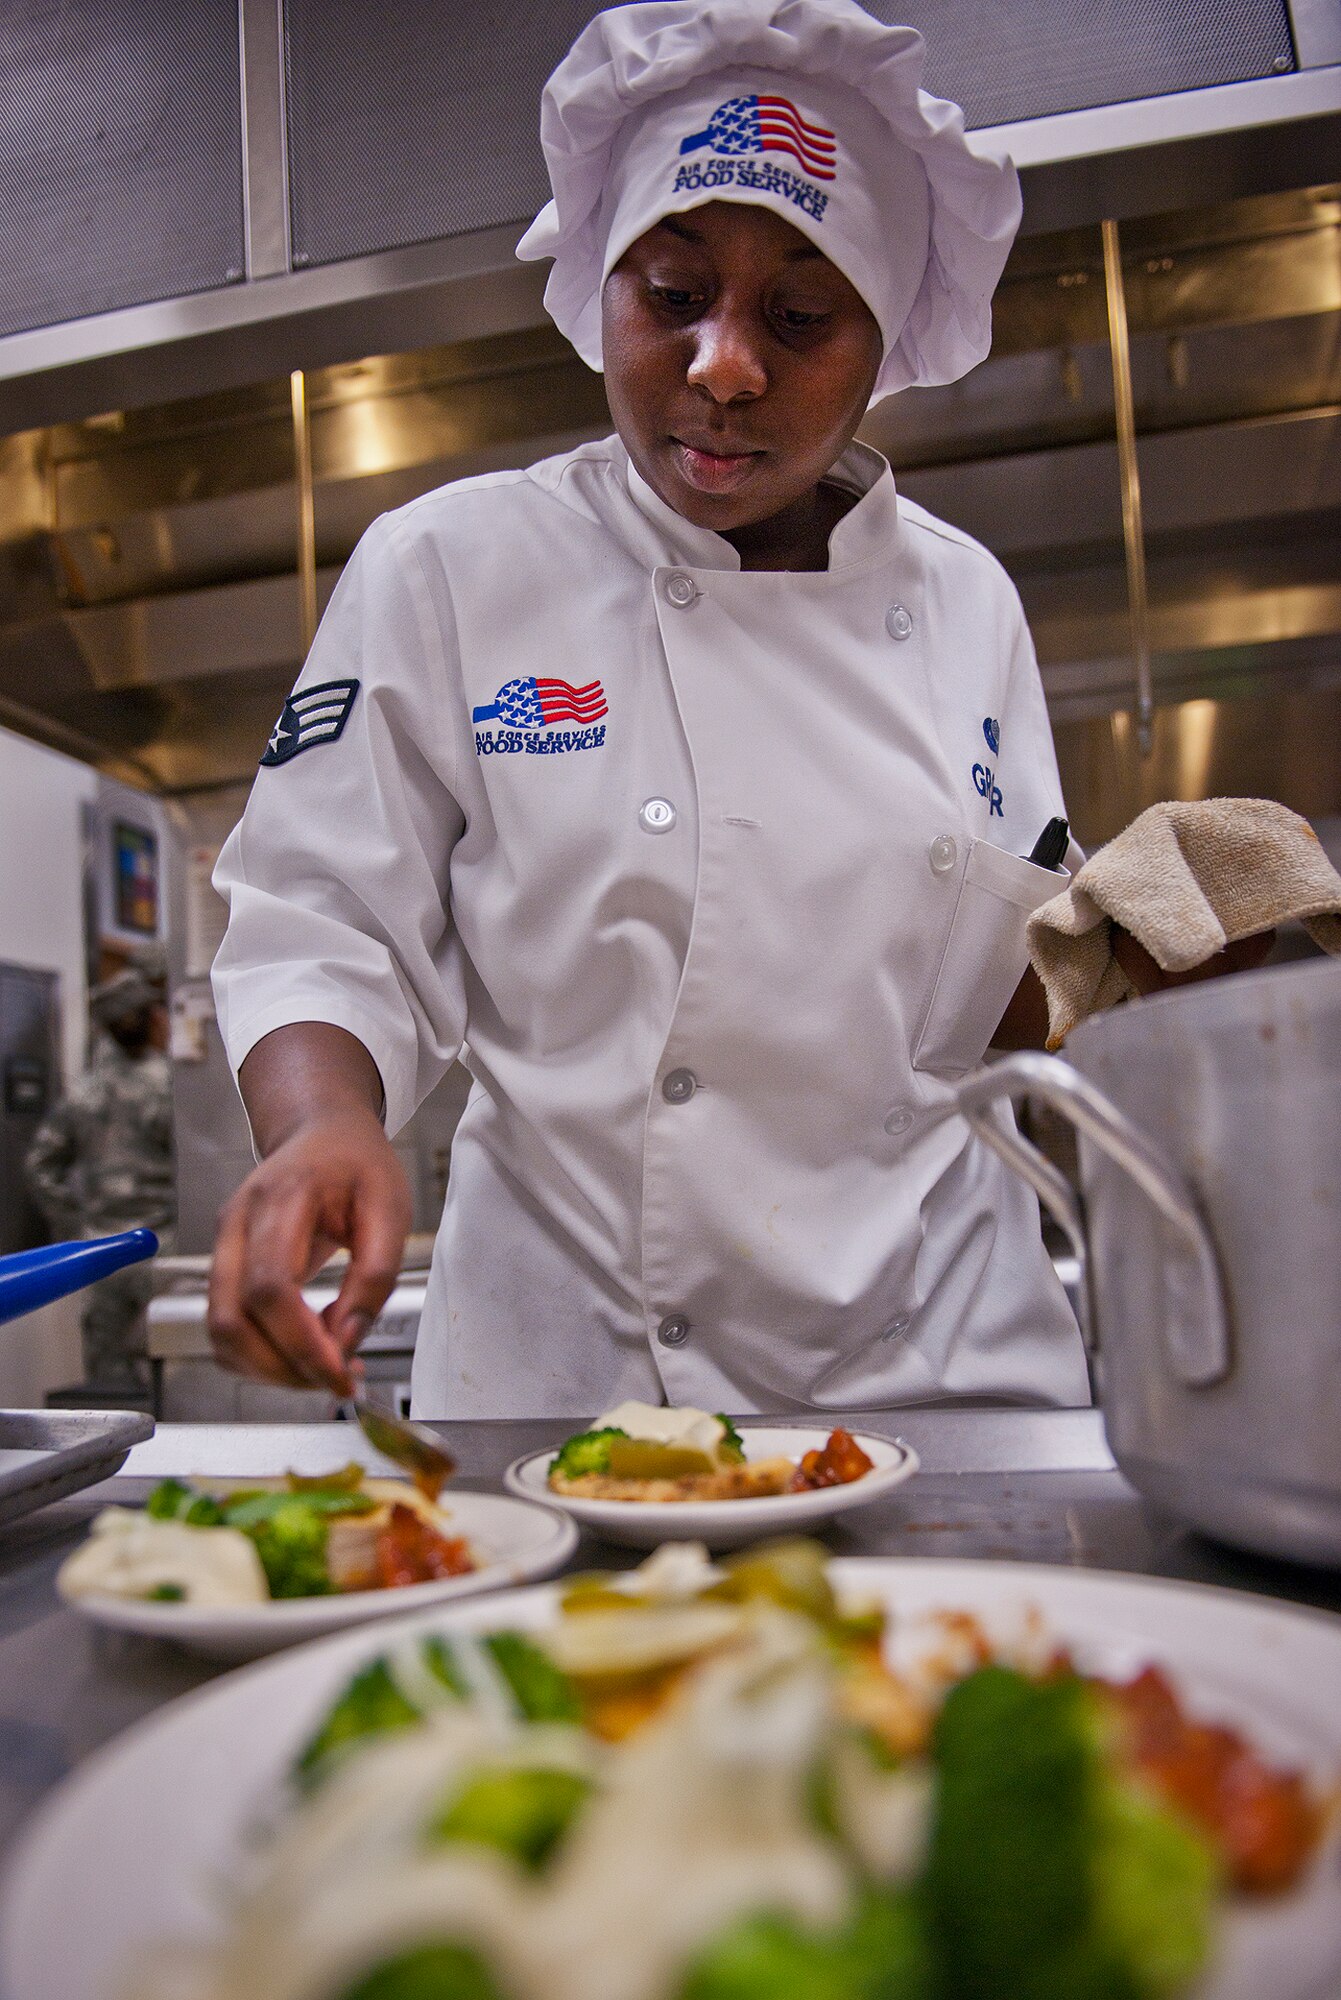 Senior Airman LaToya Grover places sweet potatoes on her plate during the base’s first “Chopped” cooking competition July 24 at Eglin.  Five Airmen from the 96th Force Support Squadron had an hour to cook a meal with three secret ingredients.  (U.S. Air Force photo/Samuel King Jr.)